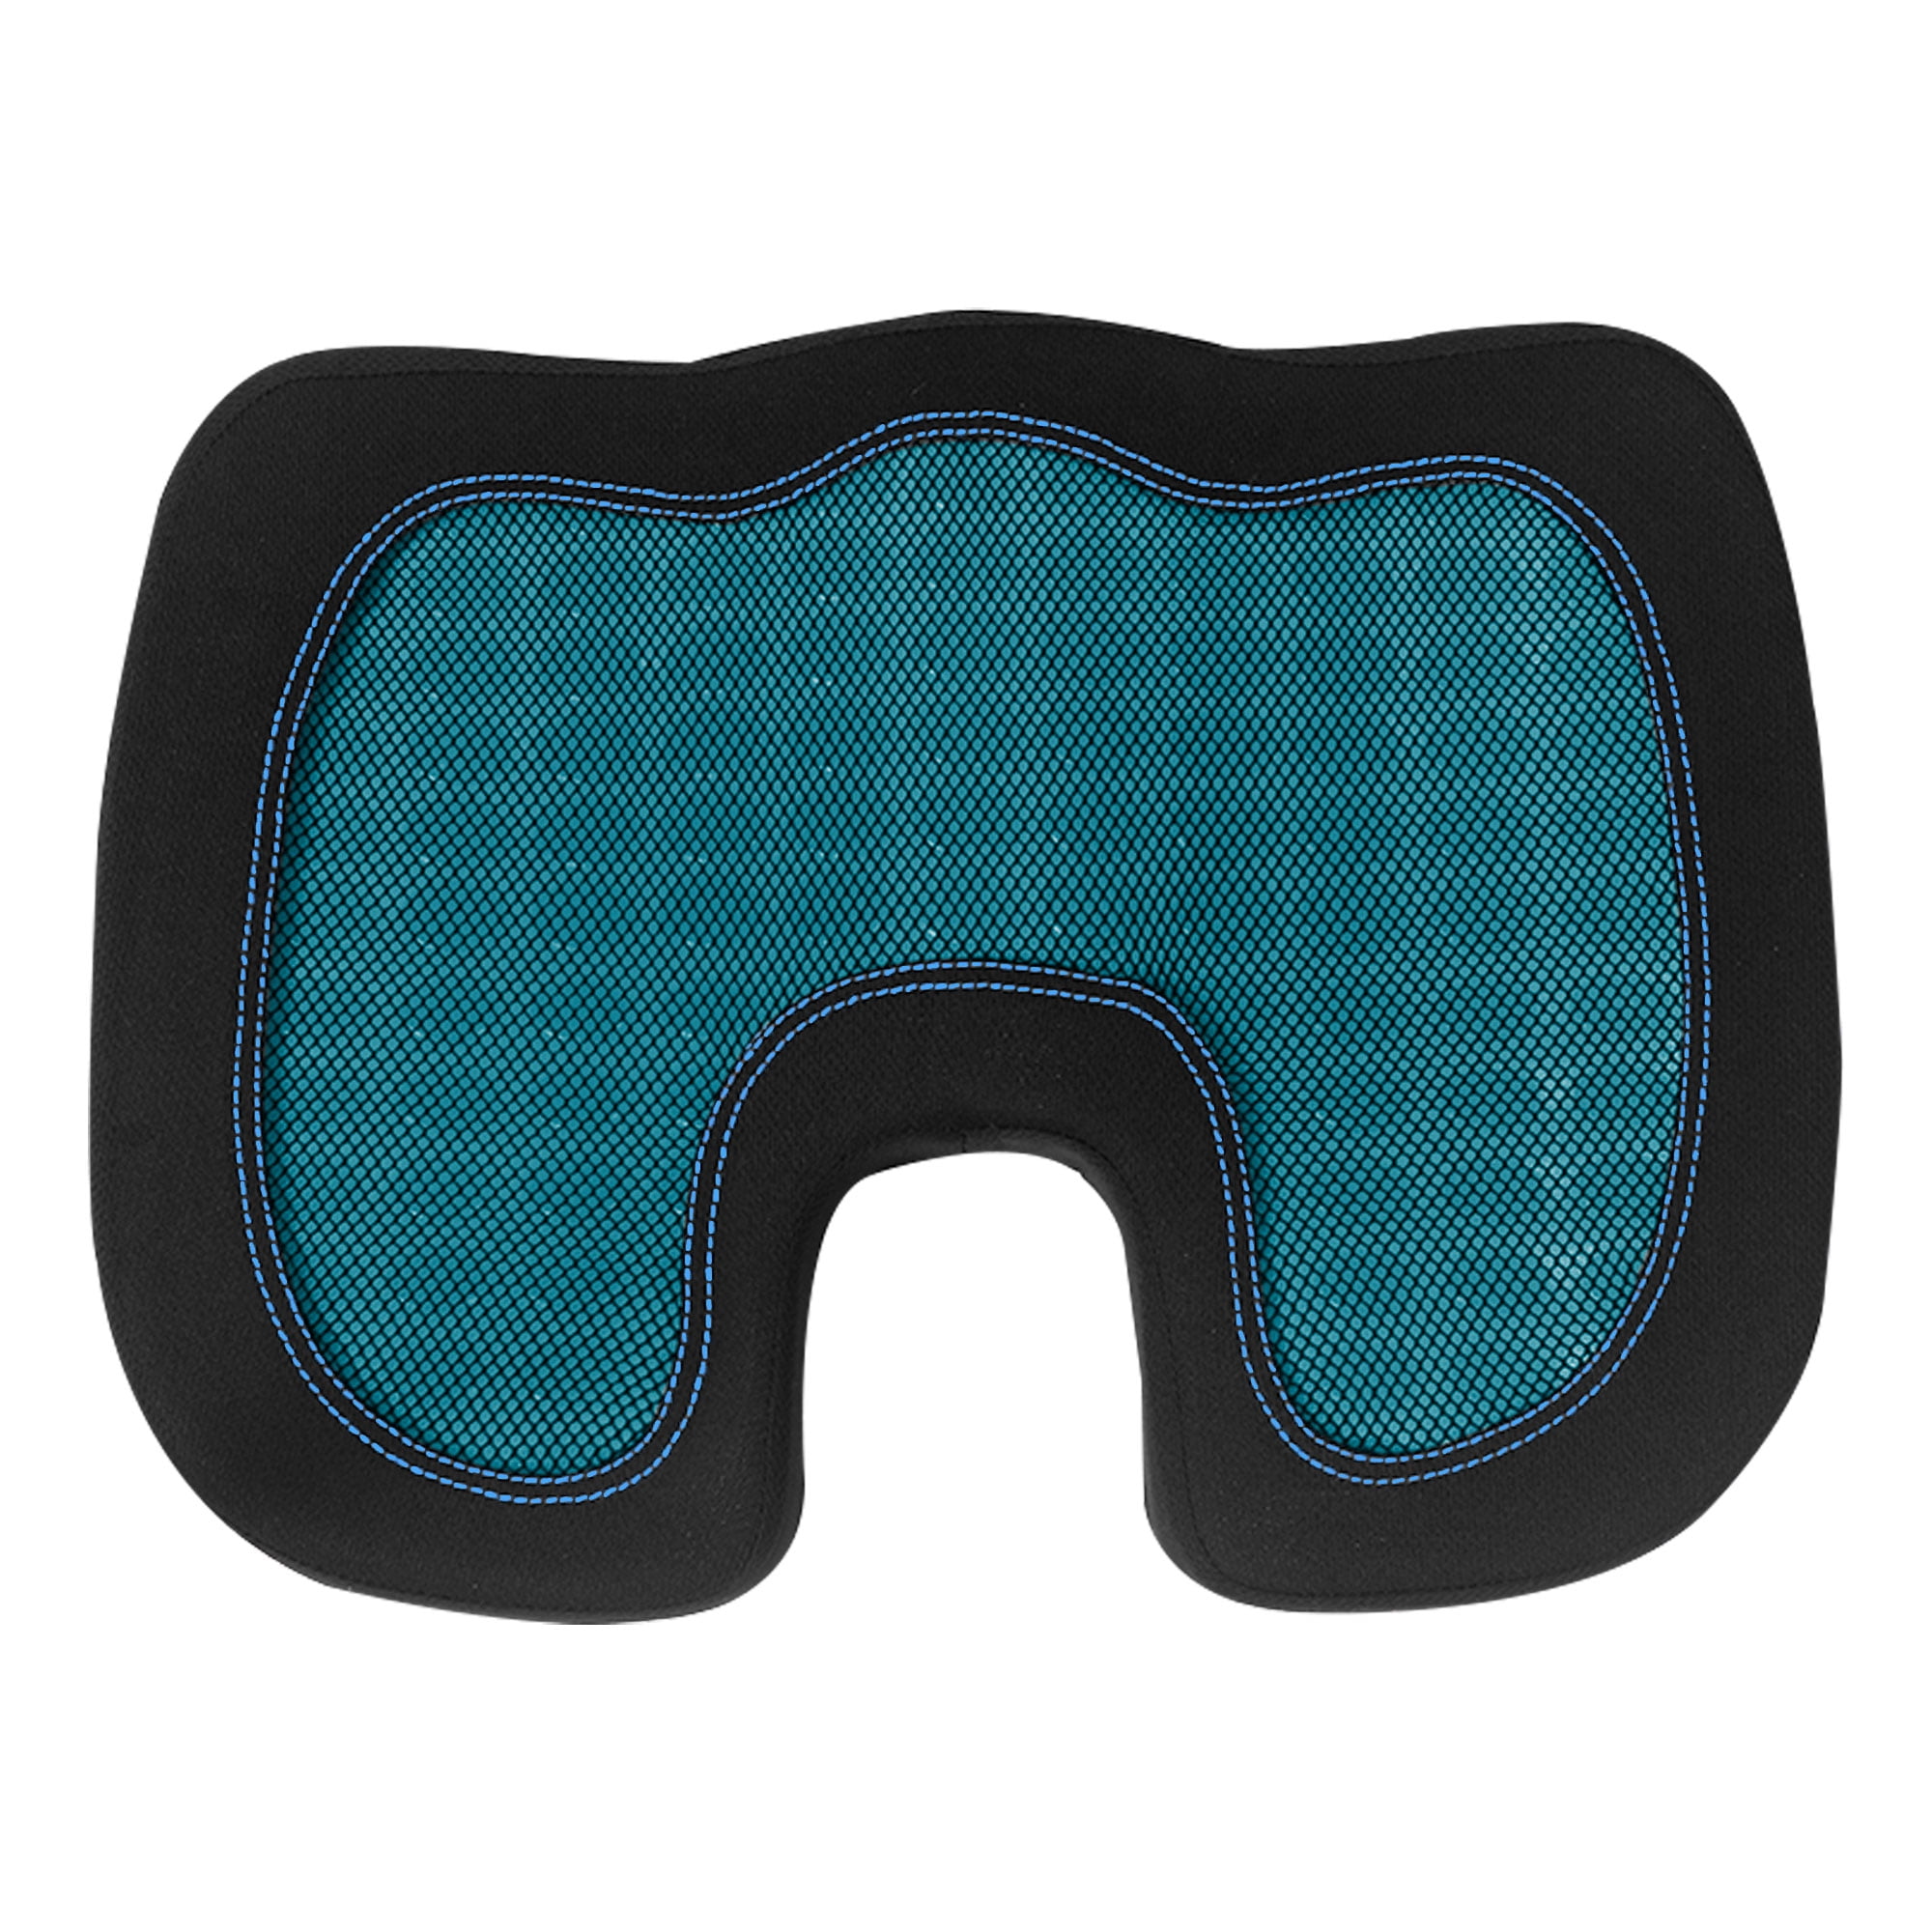 What's The Best Car Seat Cushion For Back Pain Recommended By An Expert -  Glory Cycles